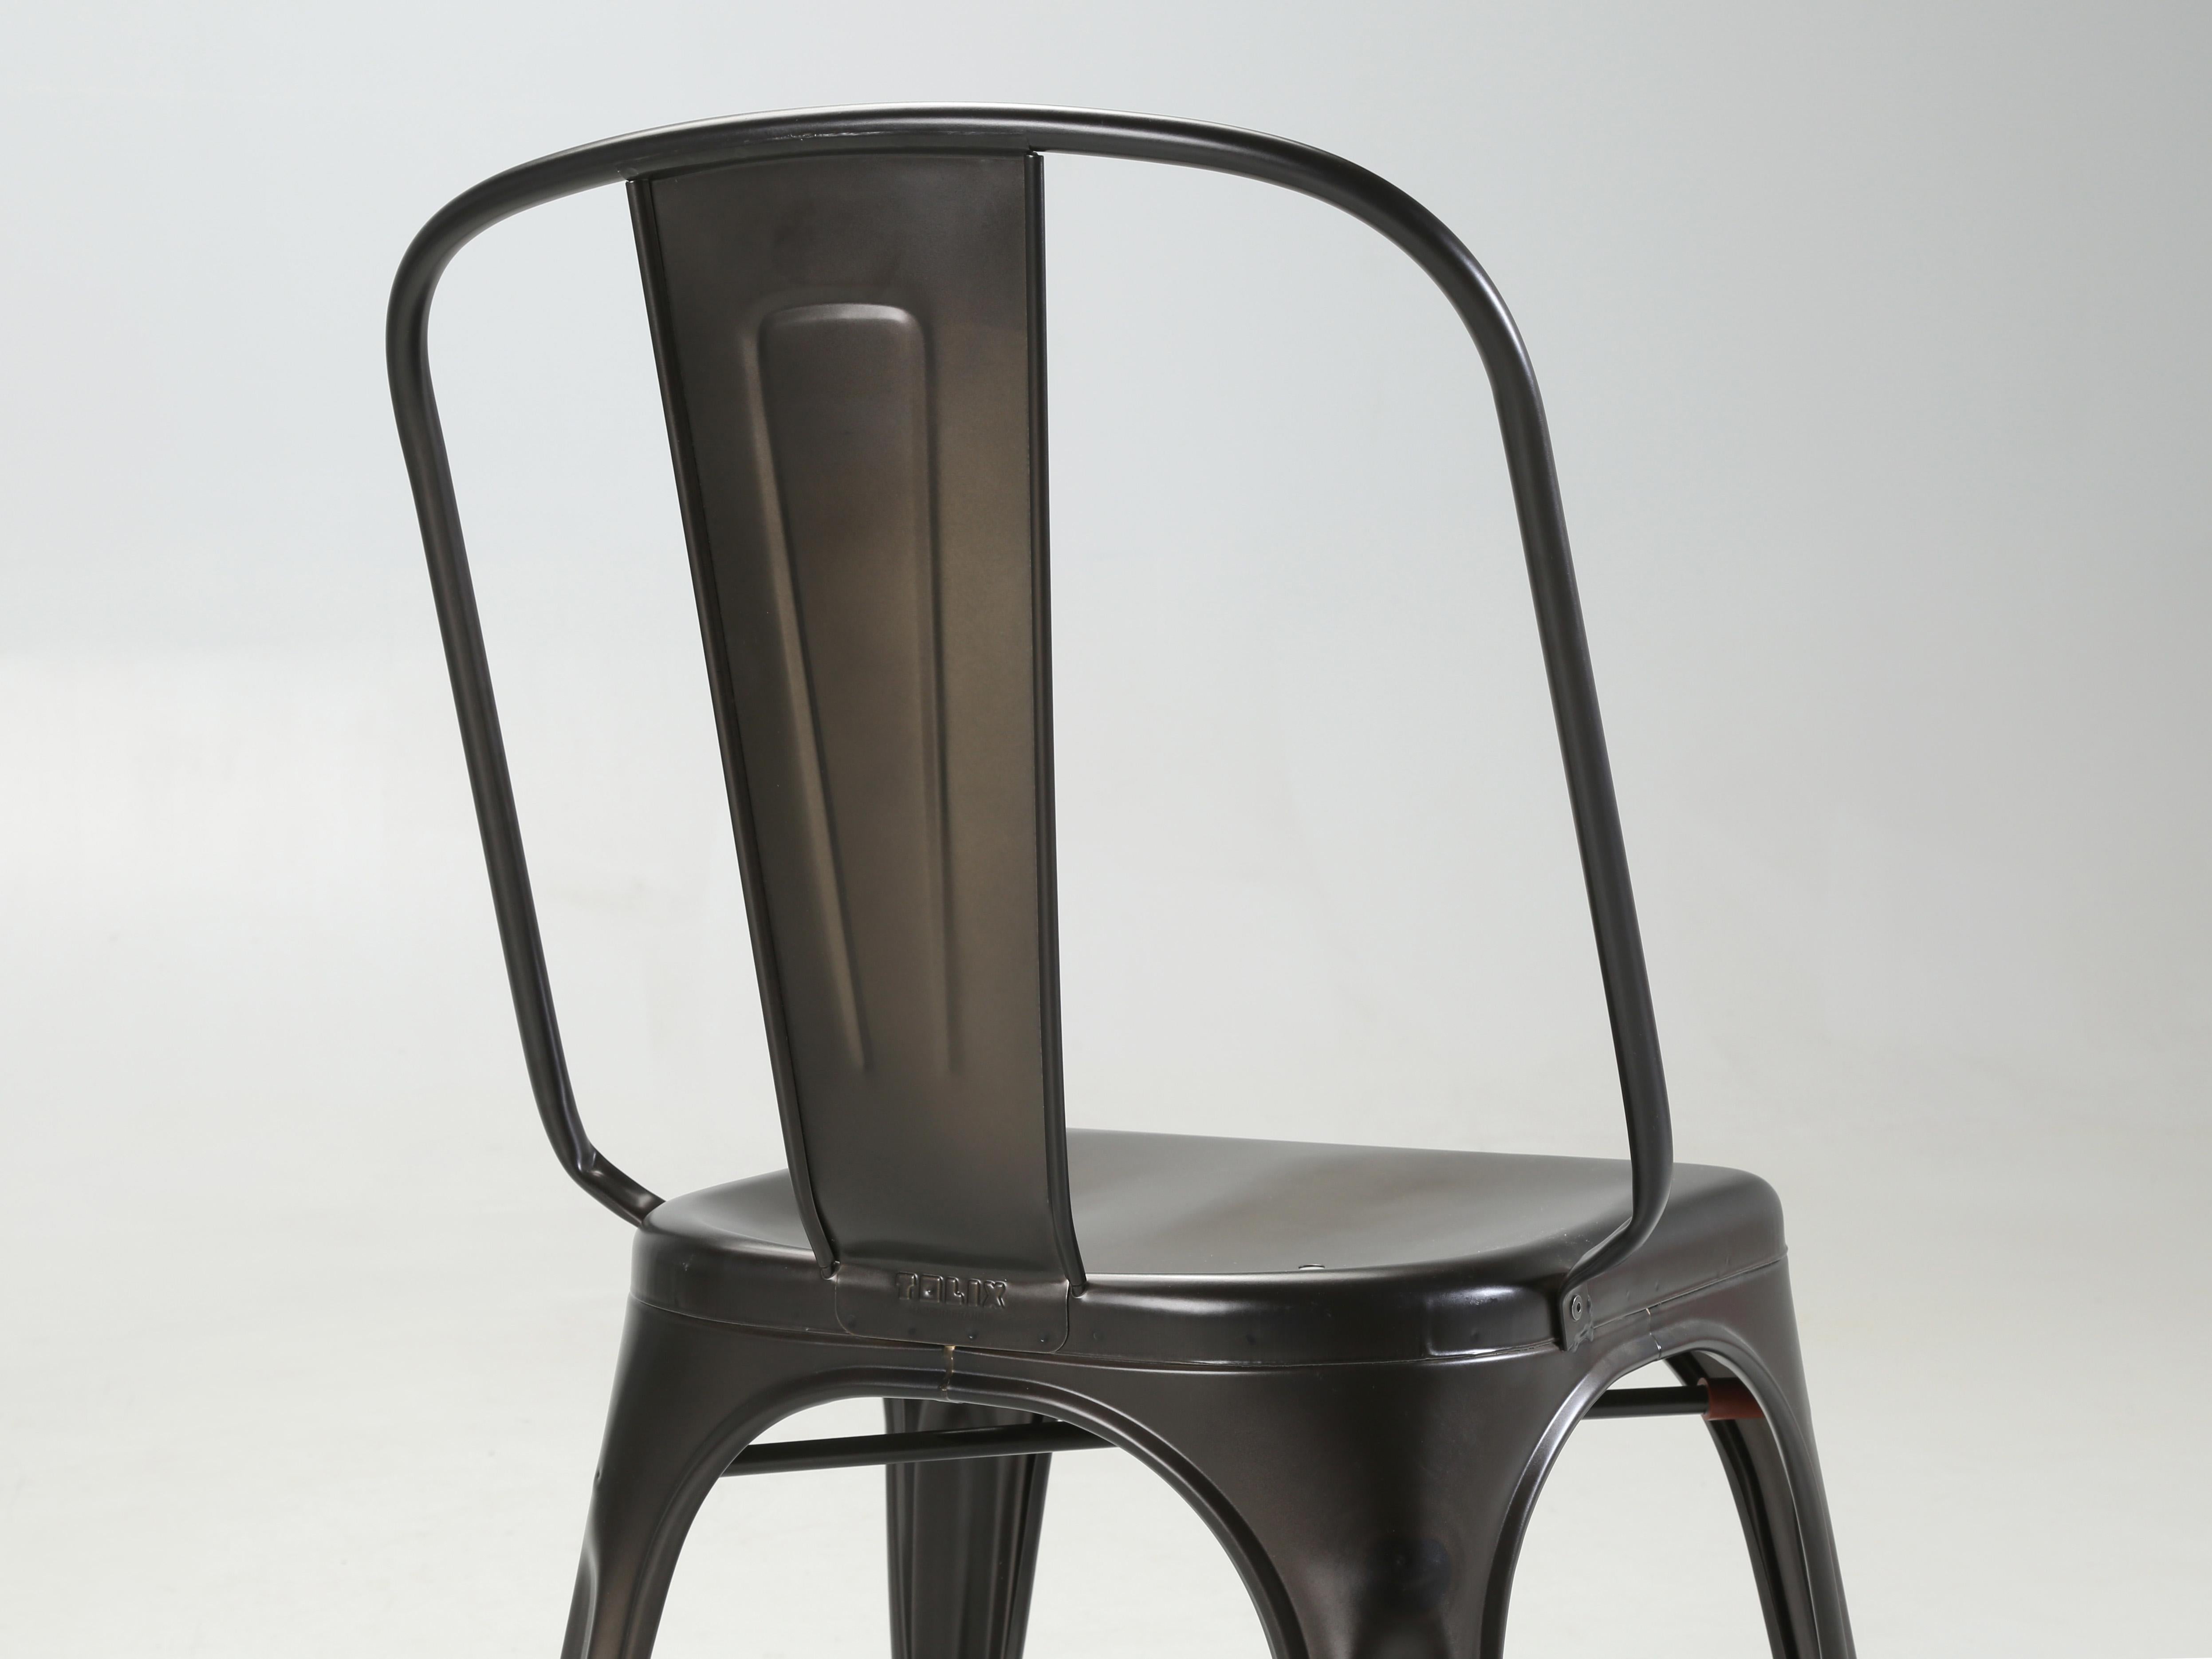 Set of (4) French Tolix AC Style Steel Stacking Chairs in Warm Gunmetal Eggshell In Good Condition For Sale In Chicago, IL